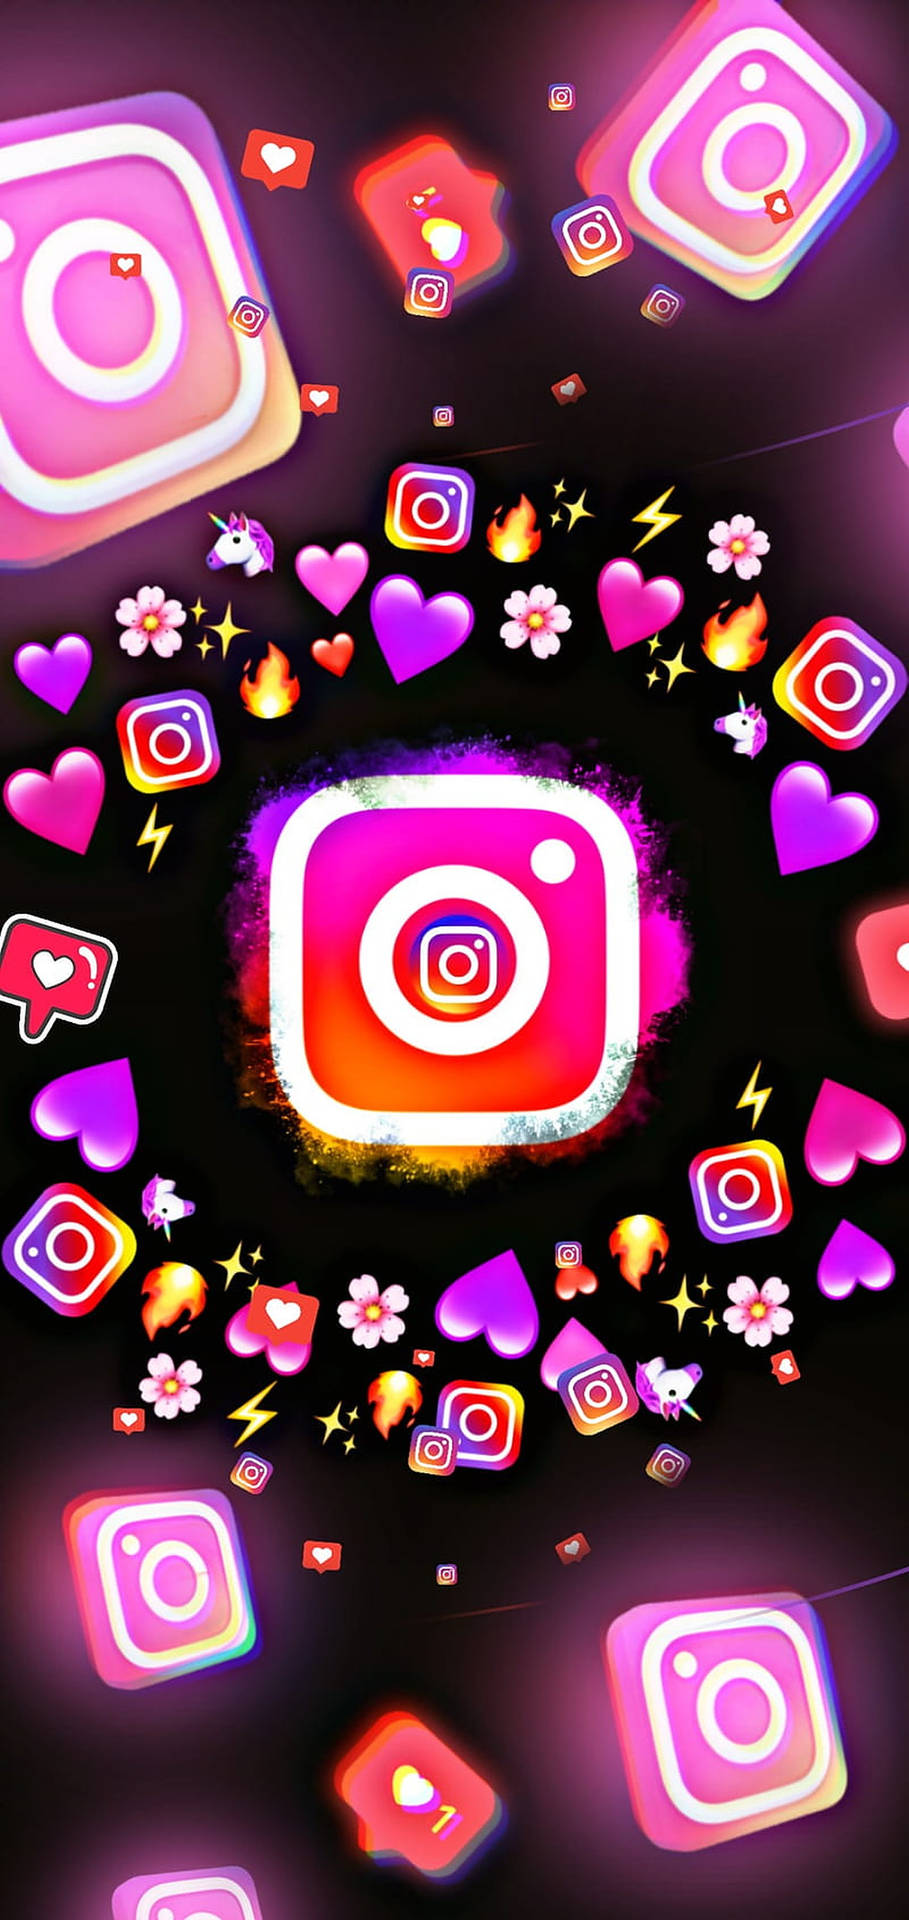 Instagram Icon And Emojis Wallpaper